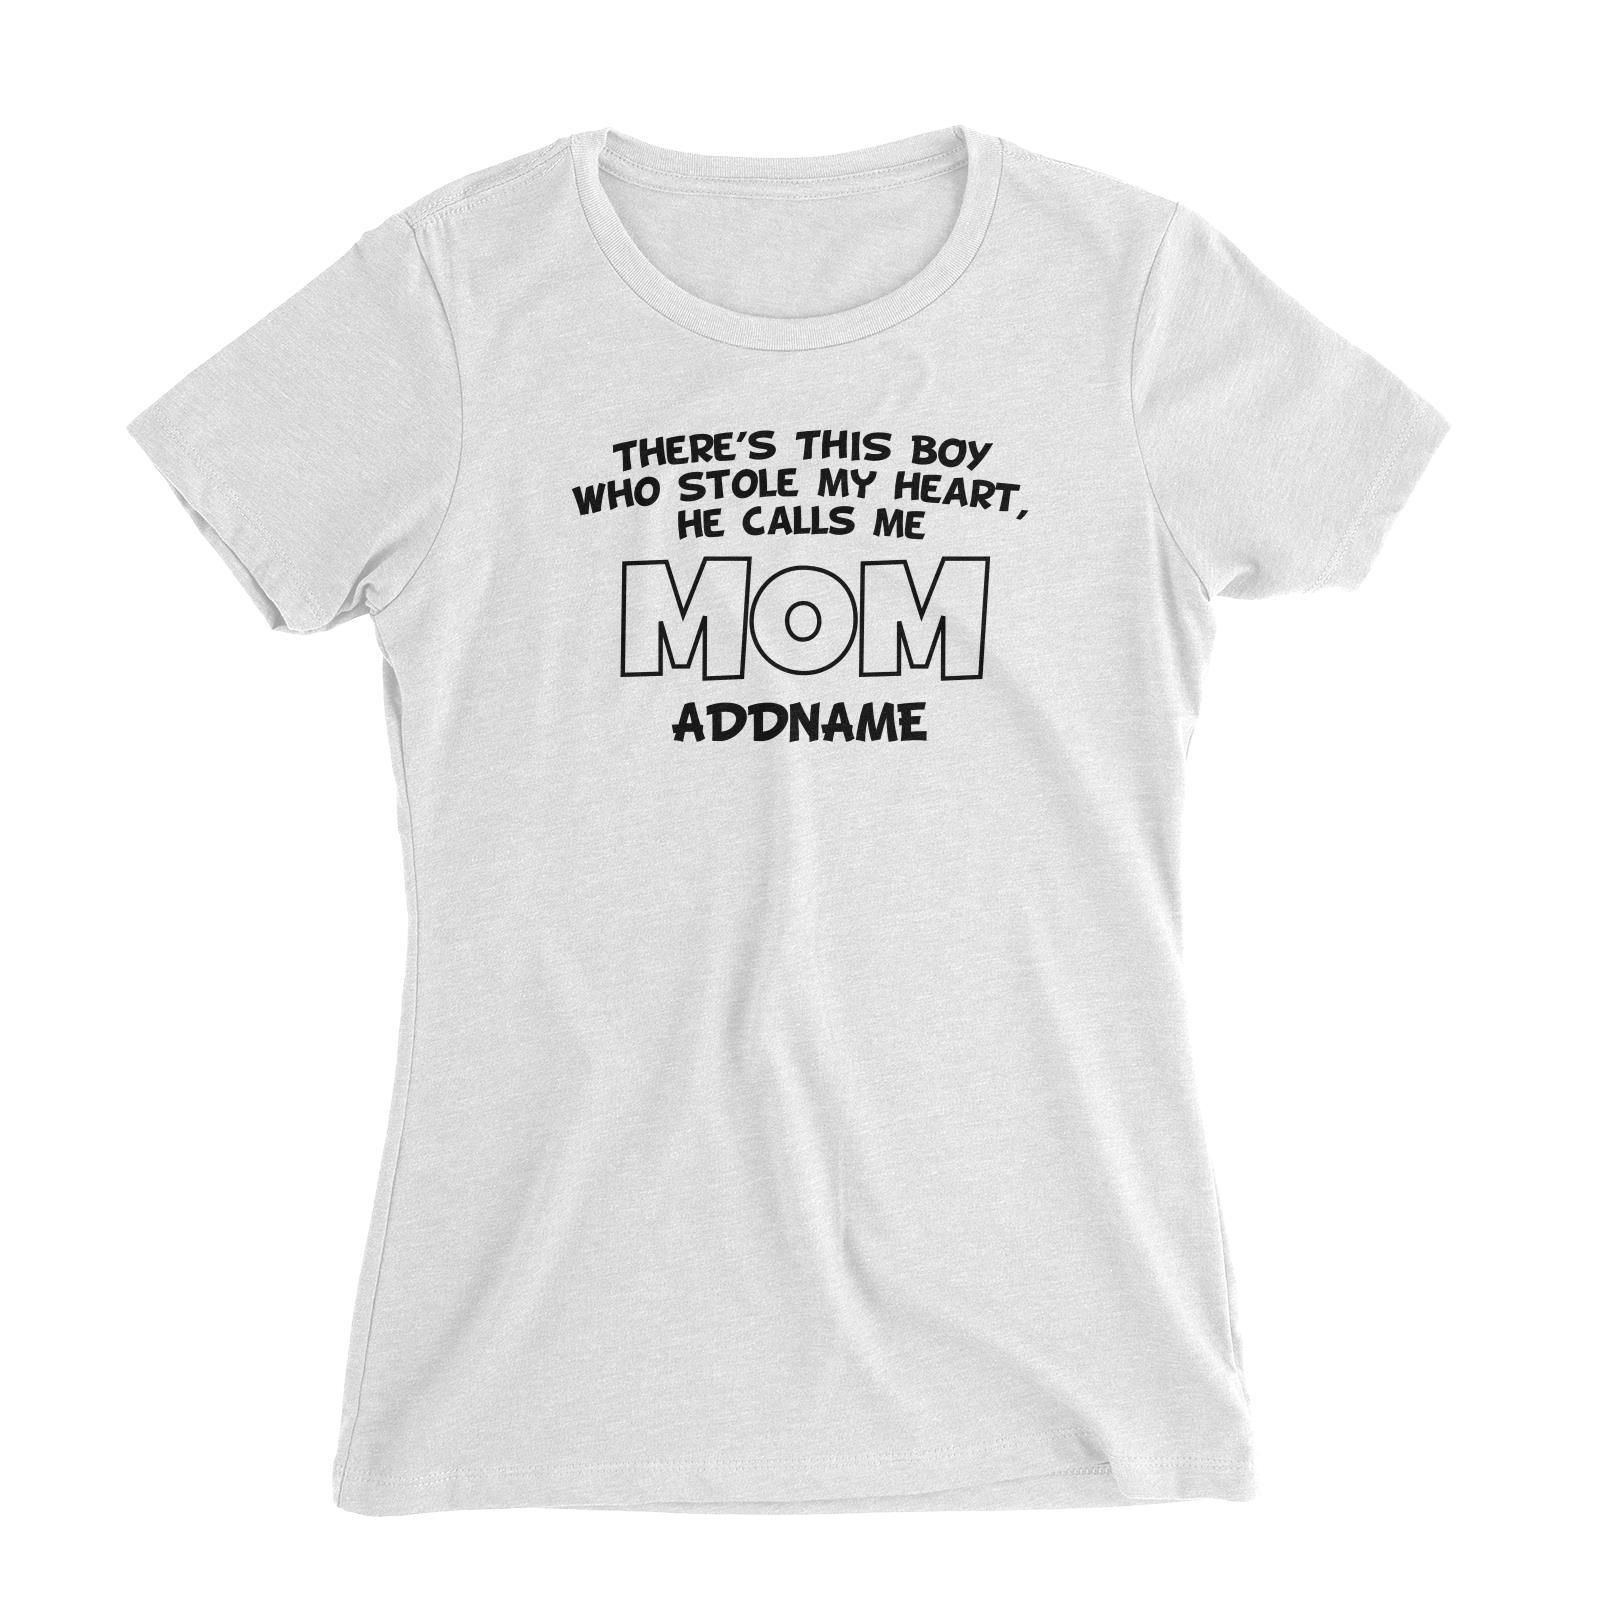 Theres This Boy Who Stole My Heart He Calls Me Mom Women's Slim Fit T-Shirt